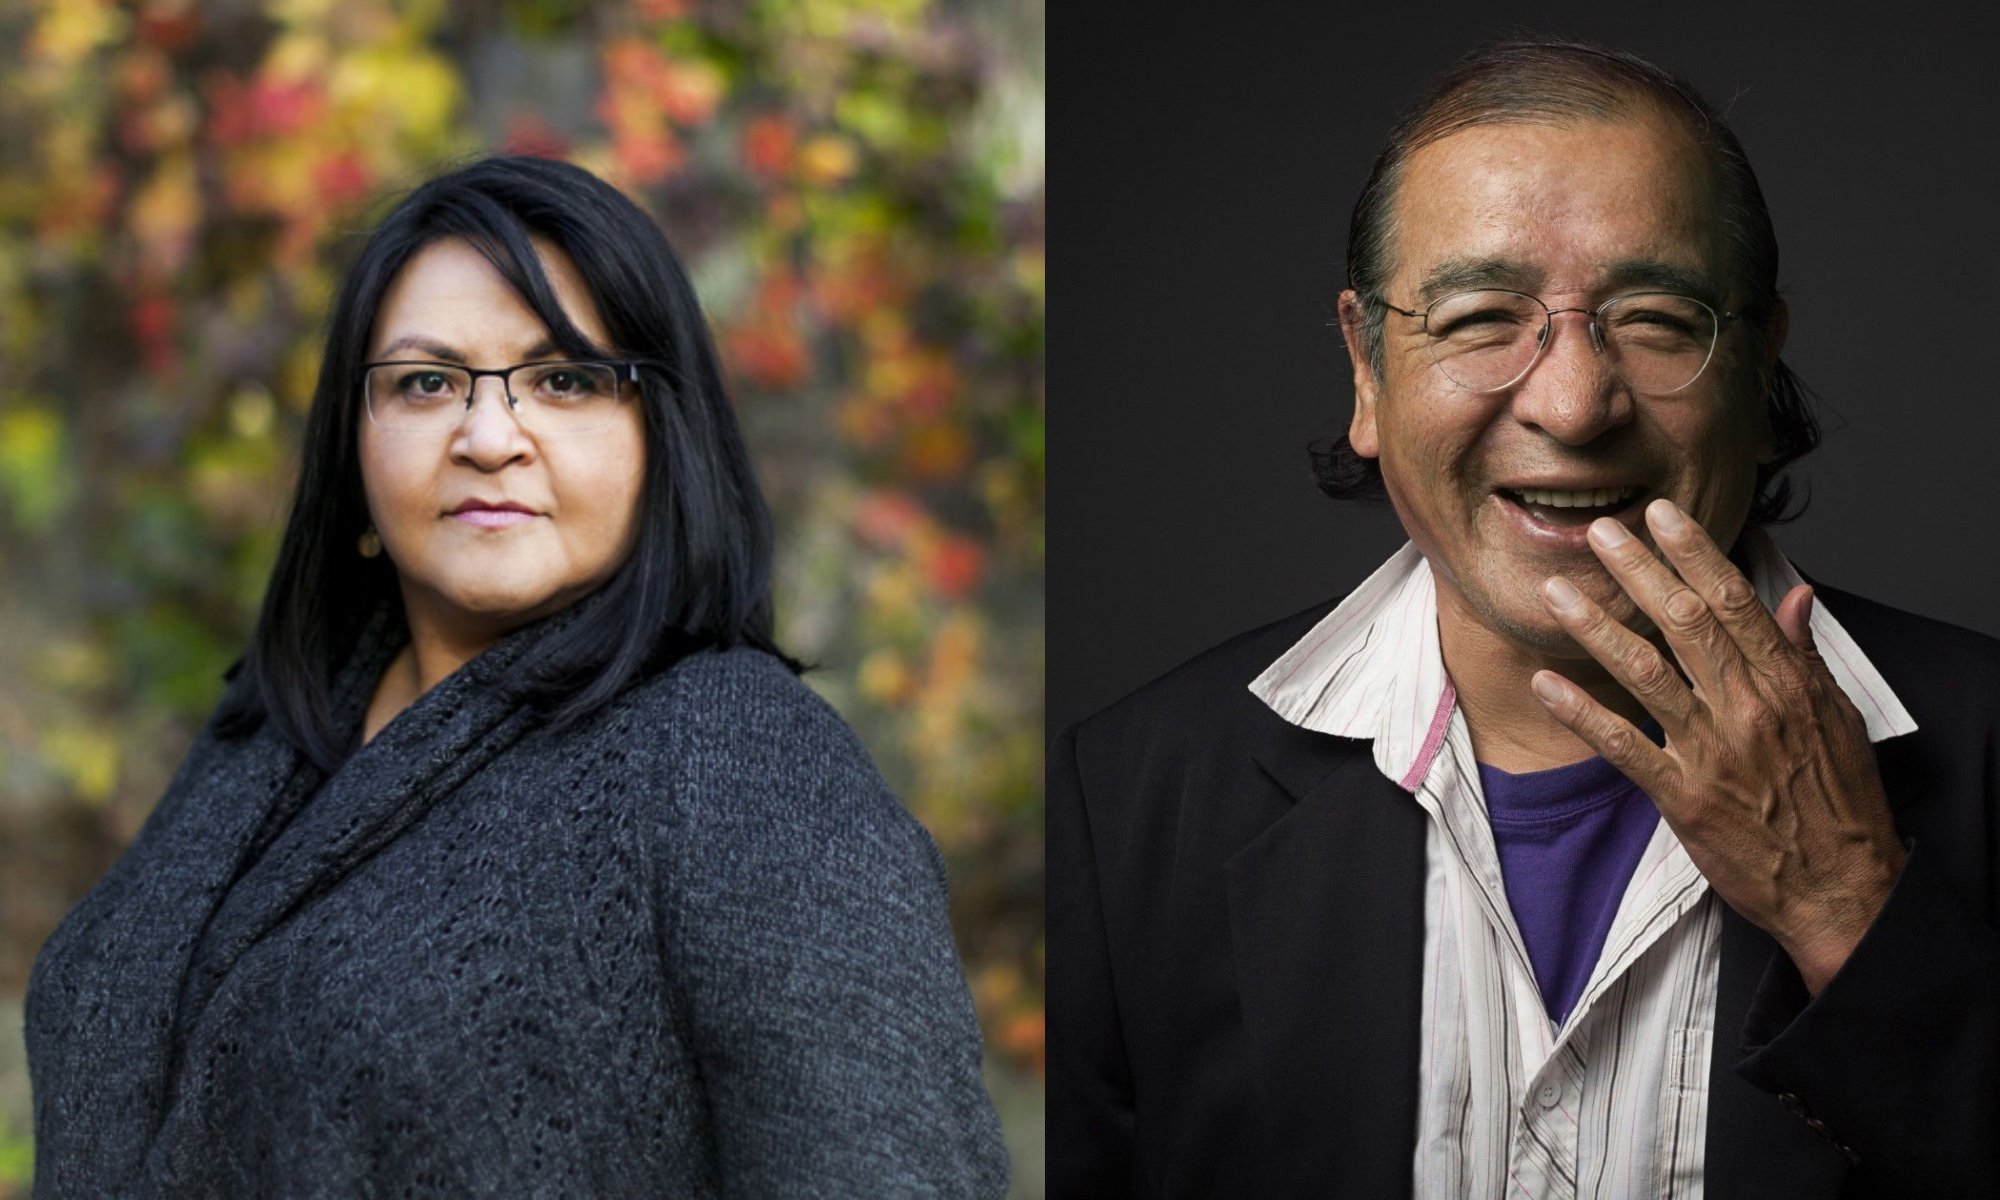 Authors Eden Robinson and Tomson Highway